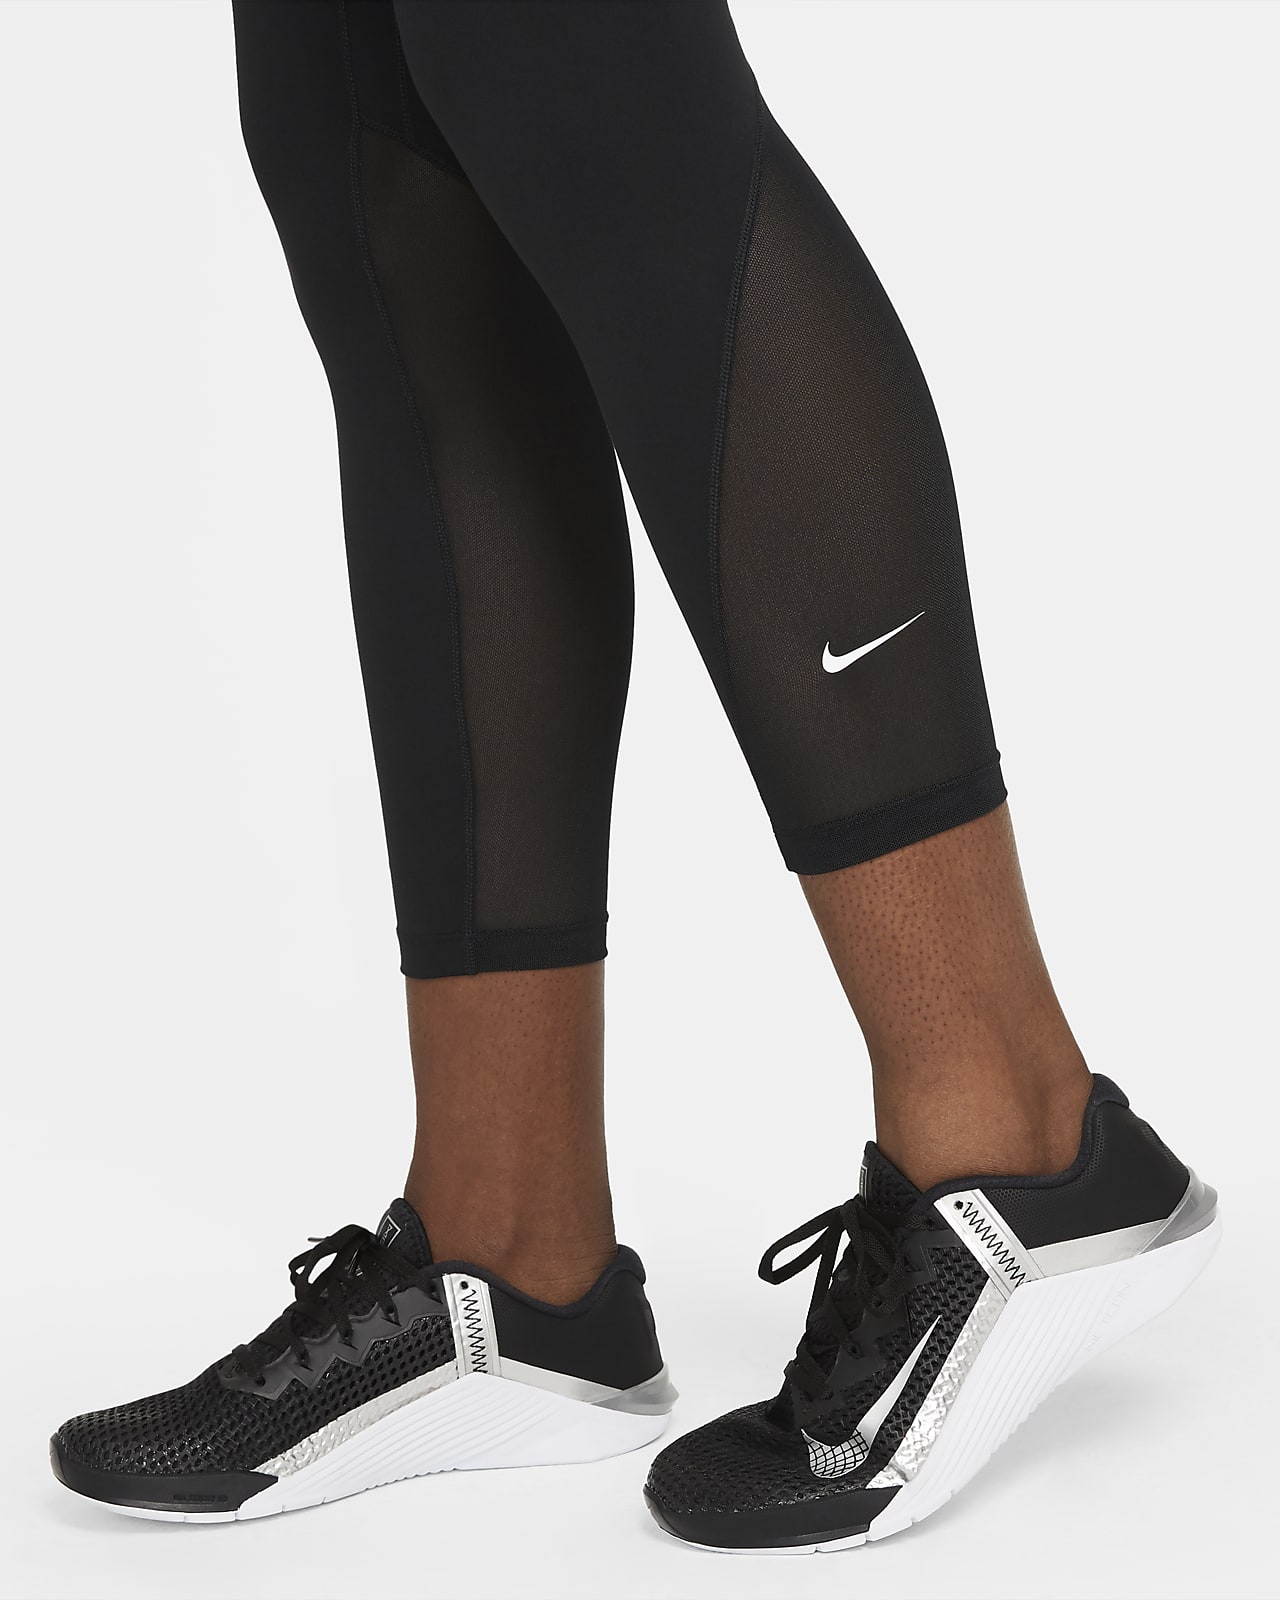 Women's Nike One Colorblock Training Tights FinestVibes